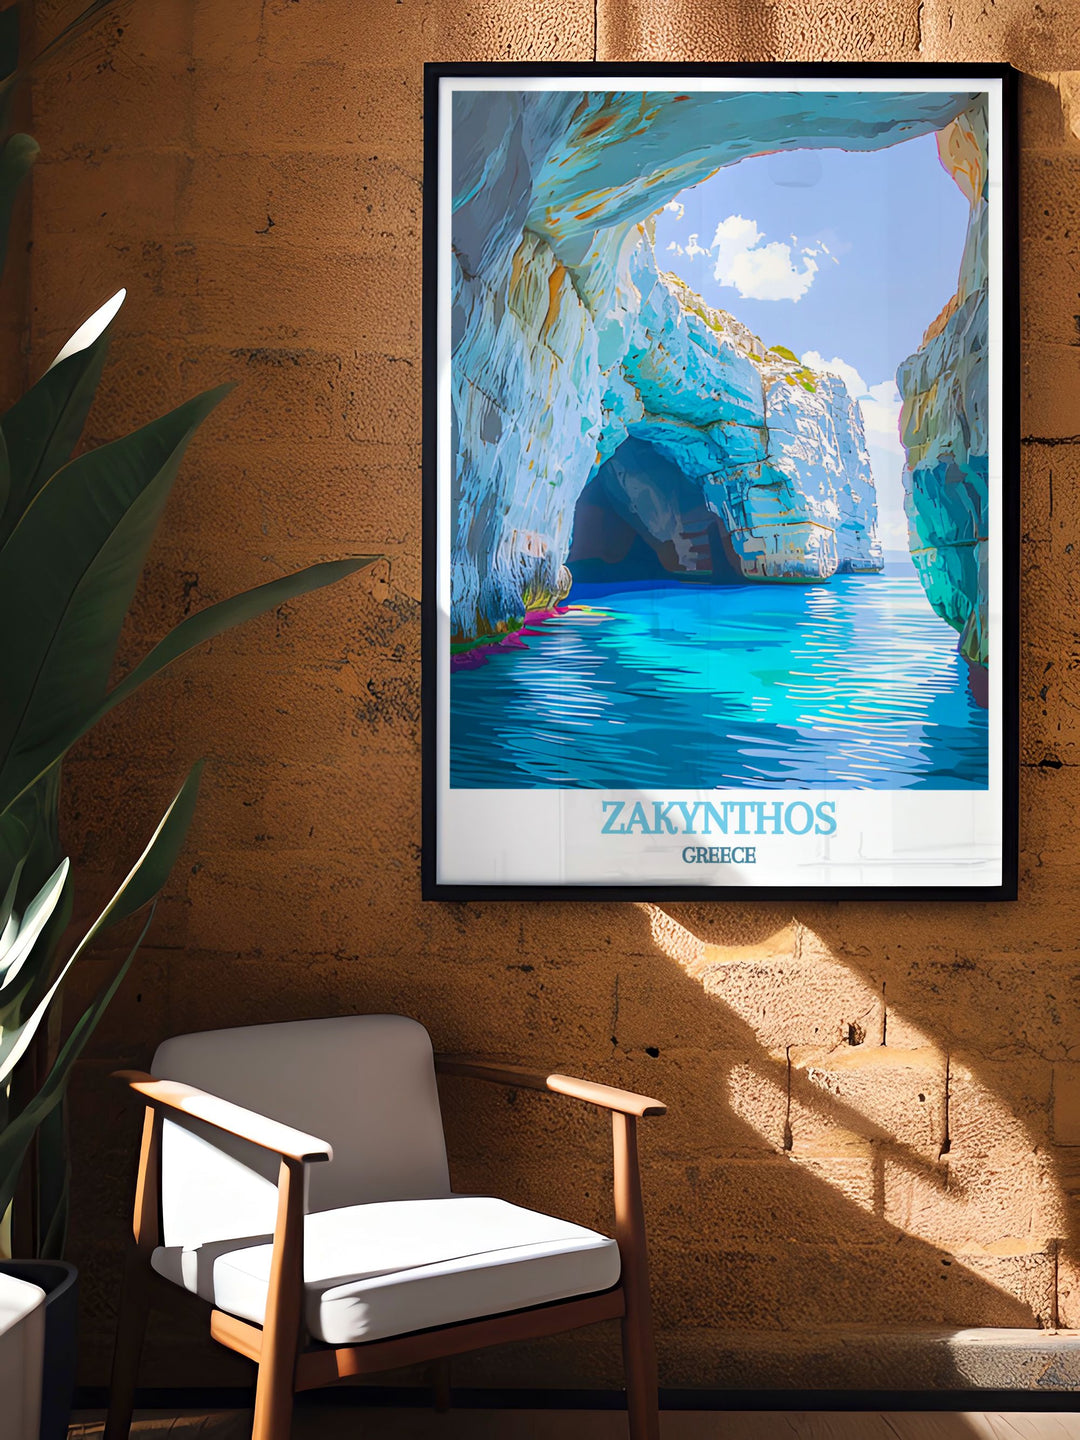 Zakynthos Print featuring the rich culture and stunning landscapes of Zakynthos with an emphasis on the enchanting Blue Caves making it an excellent choice for Greece Travel Print enthusiasts